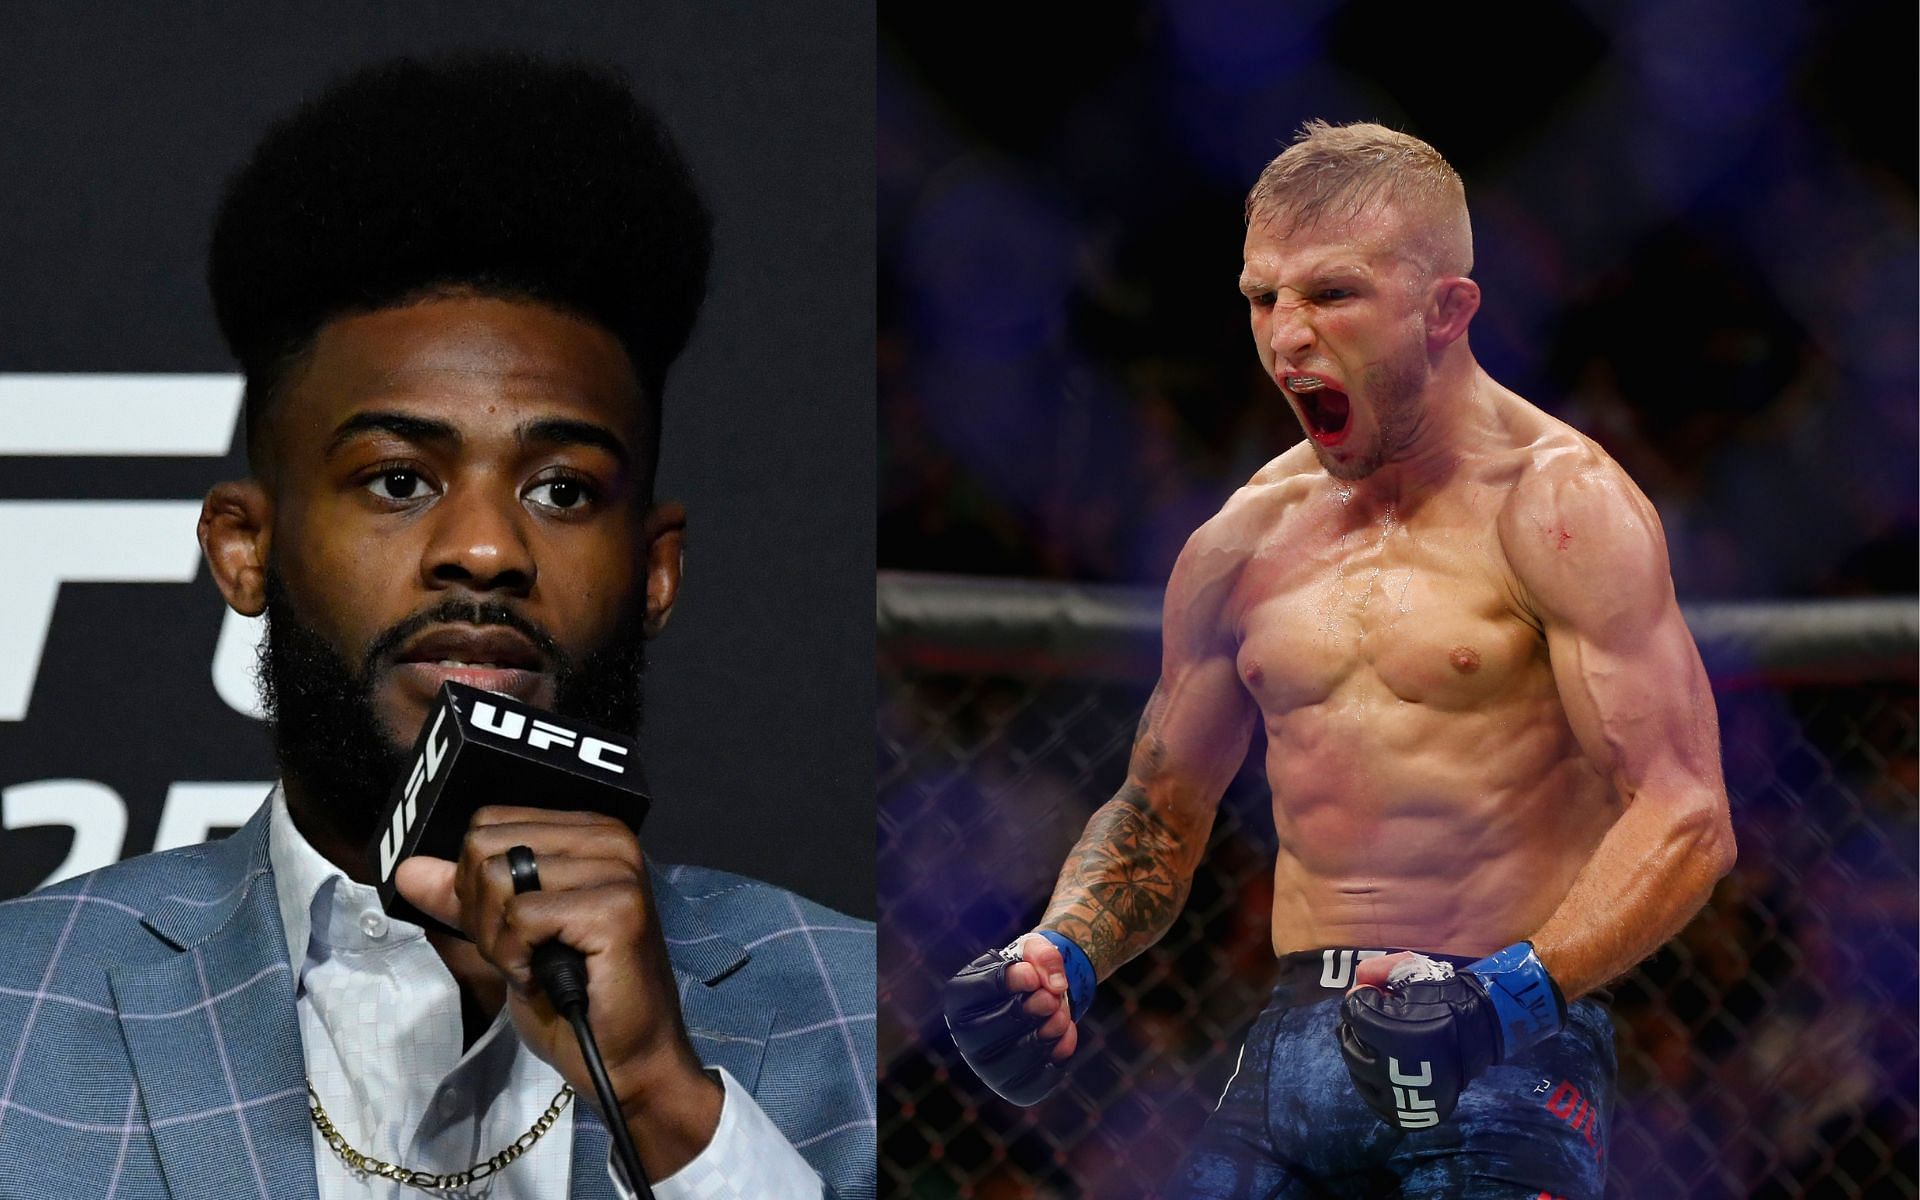 Aljamain Sterling (left) took more shots at T.J. Dillashaw (right) ahead of their upcoming bantamweight clash at UFC 280